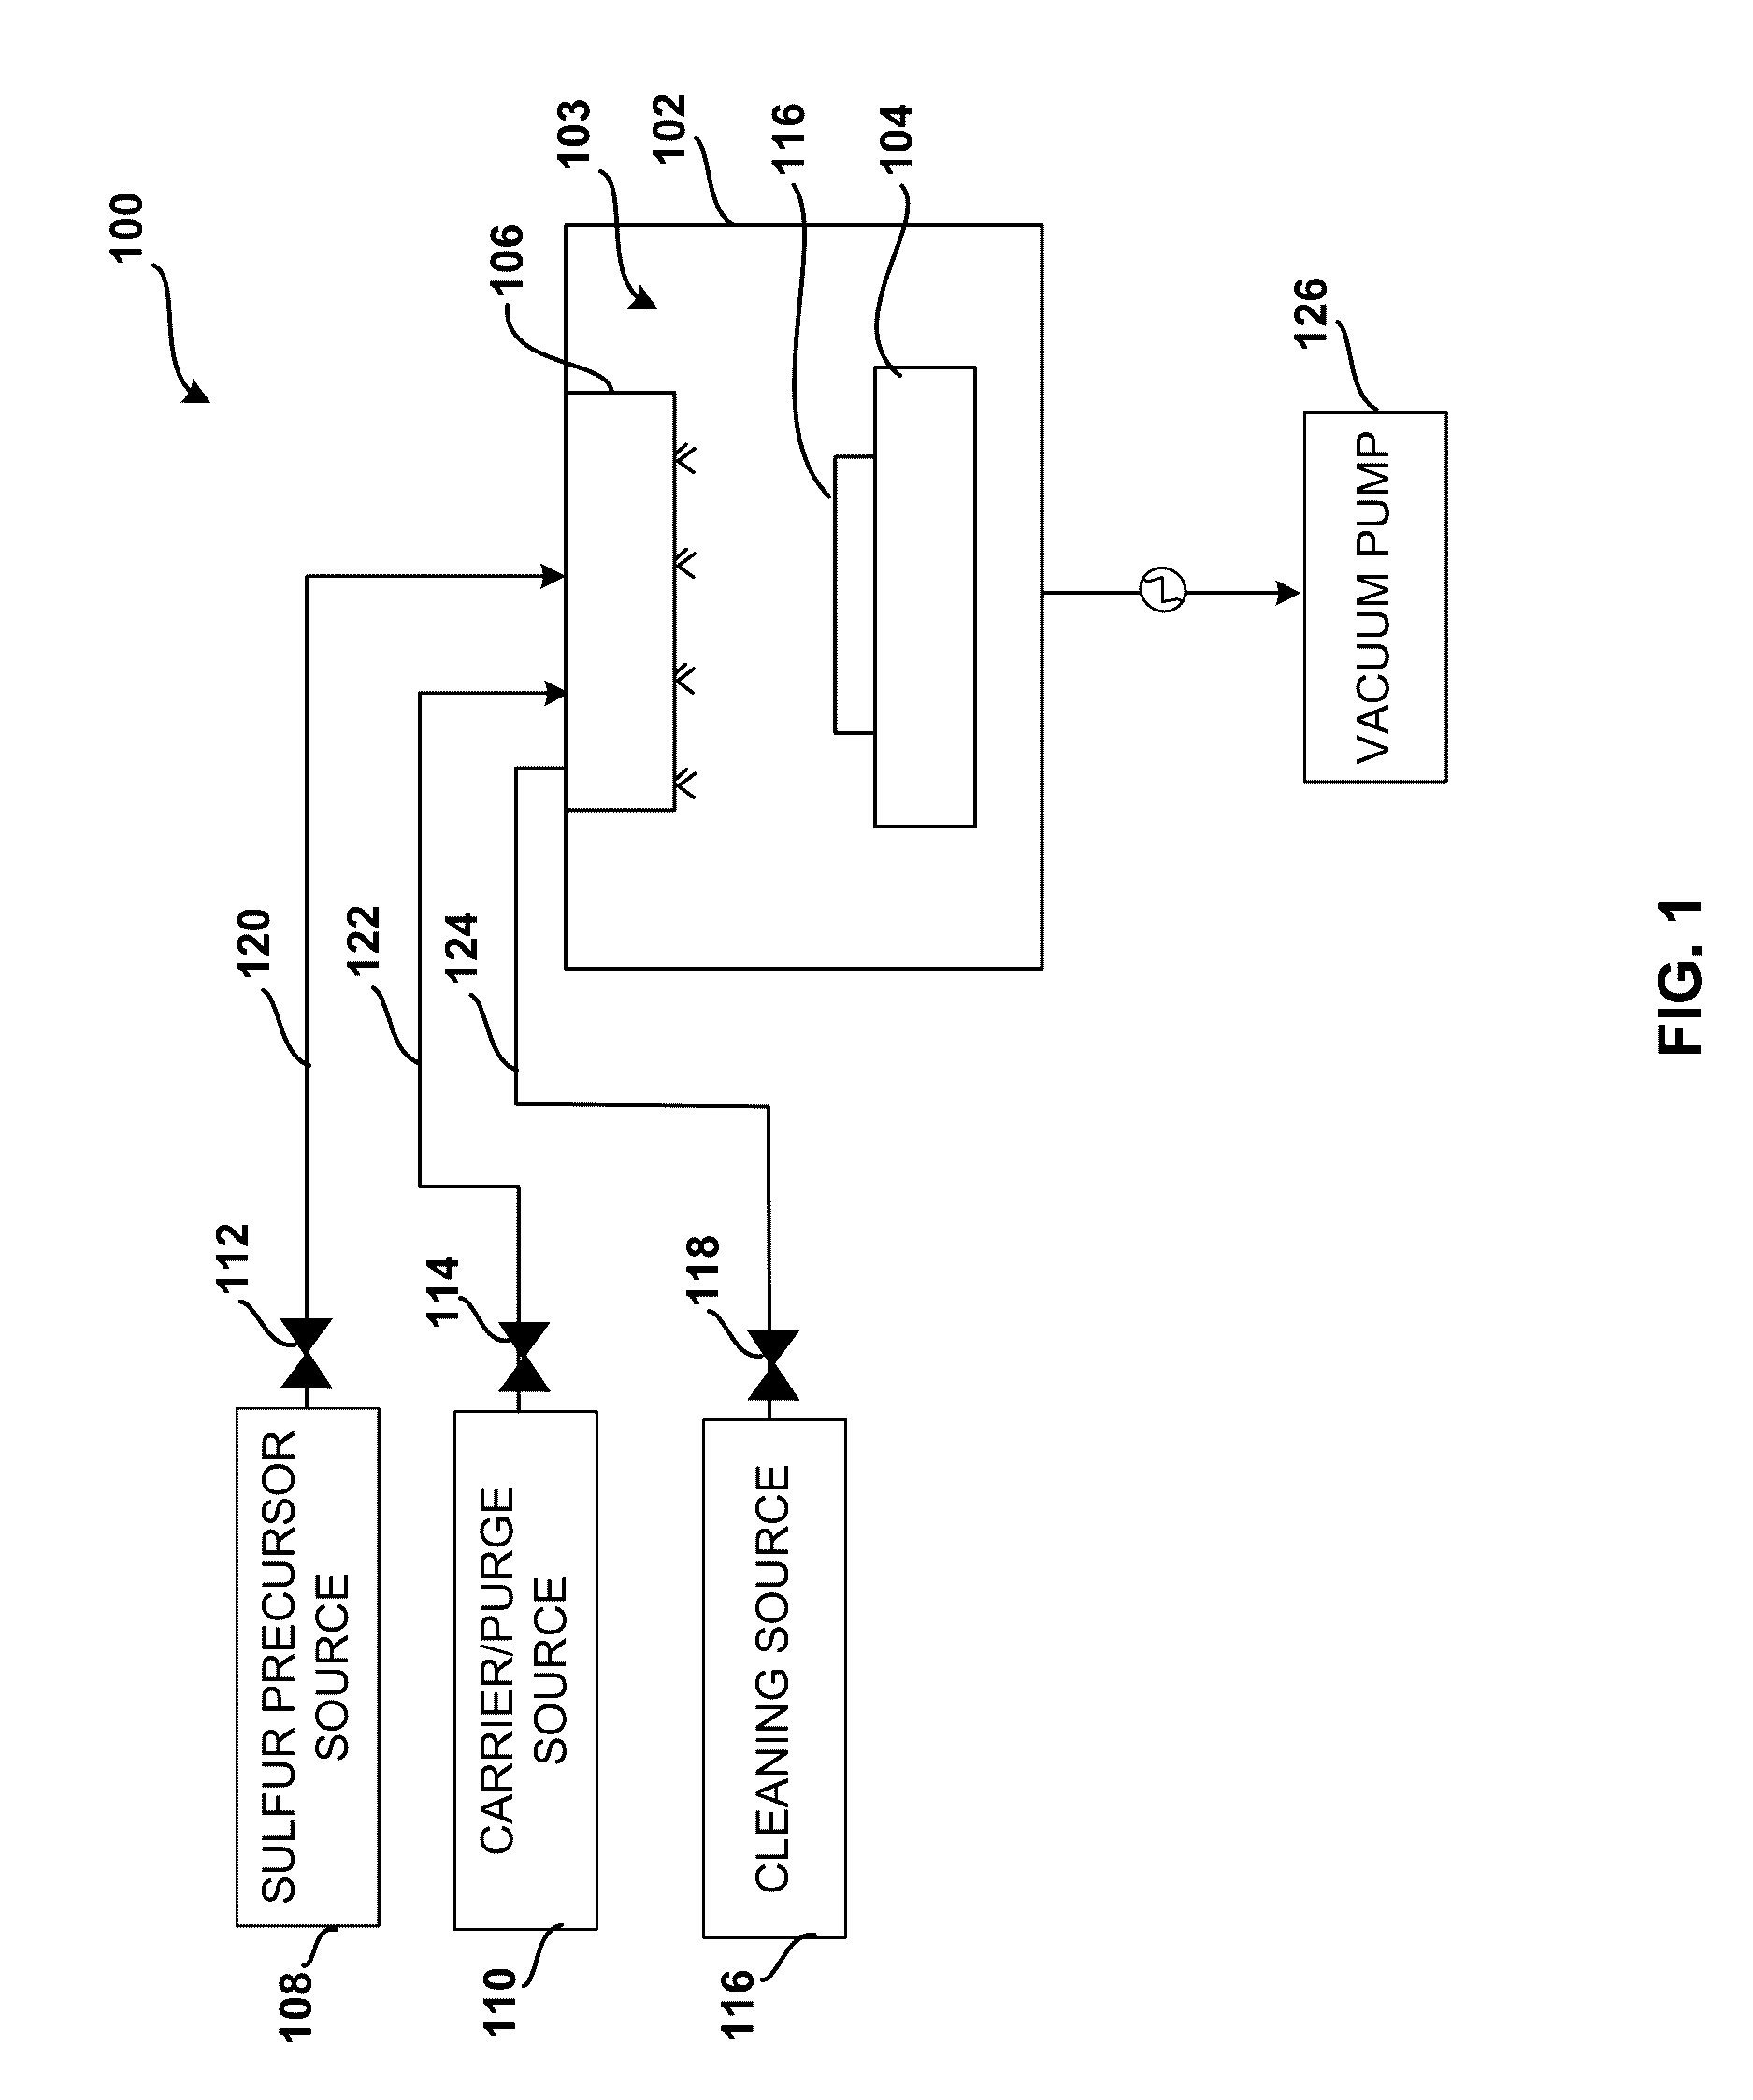 System and method for gas-phase sulfur passivation of a semiconductor surface